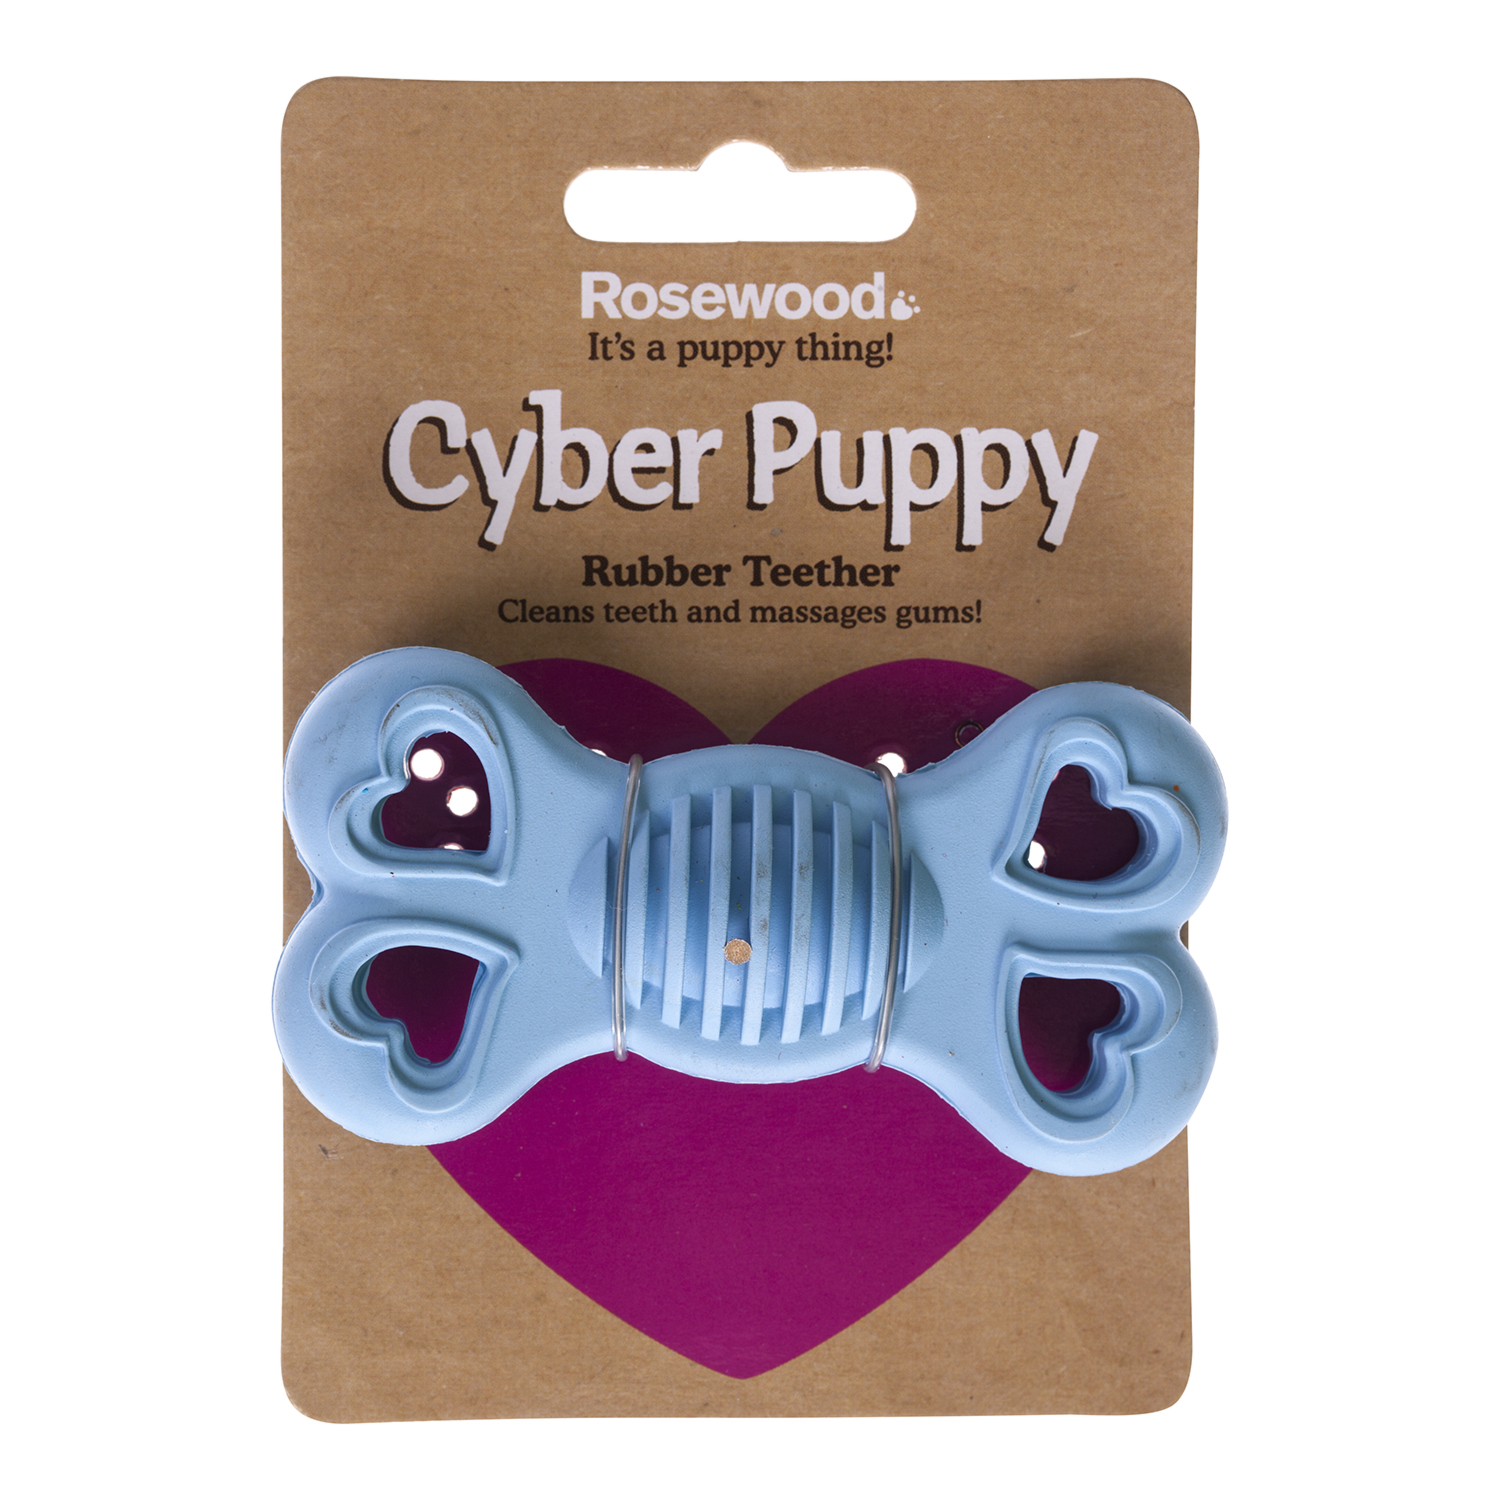 Rosewood Cyber Puppy Teether Shapes Image